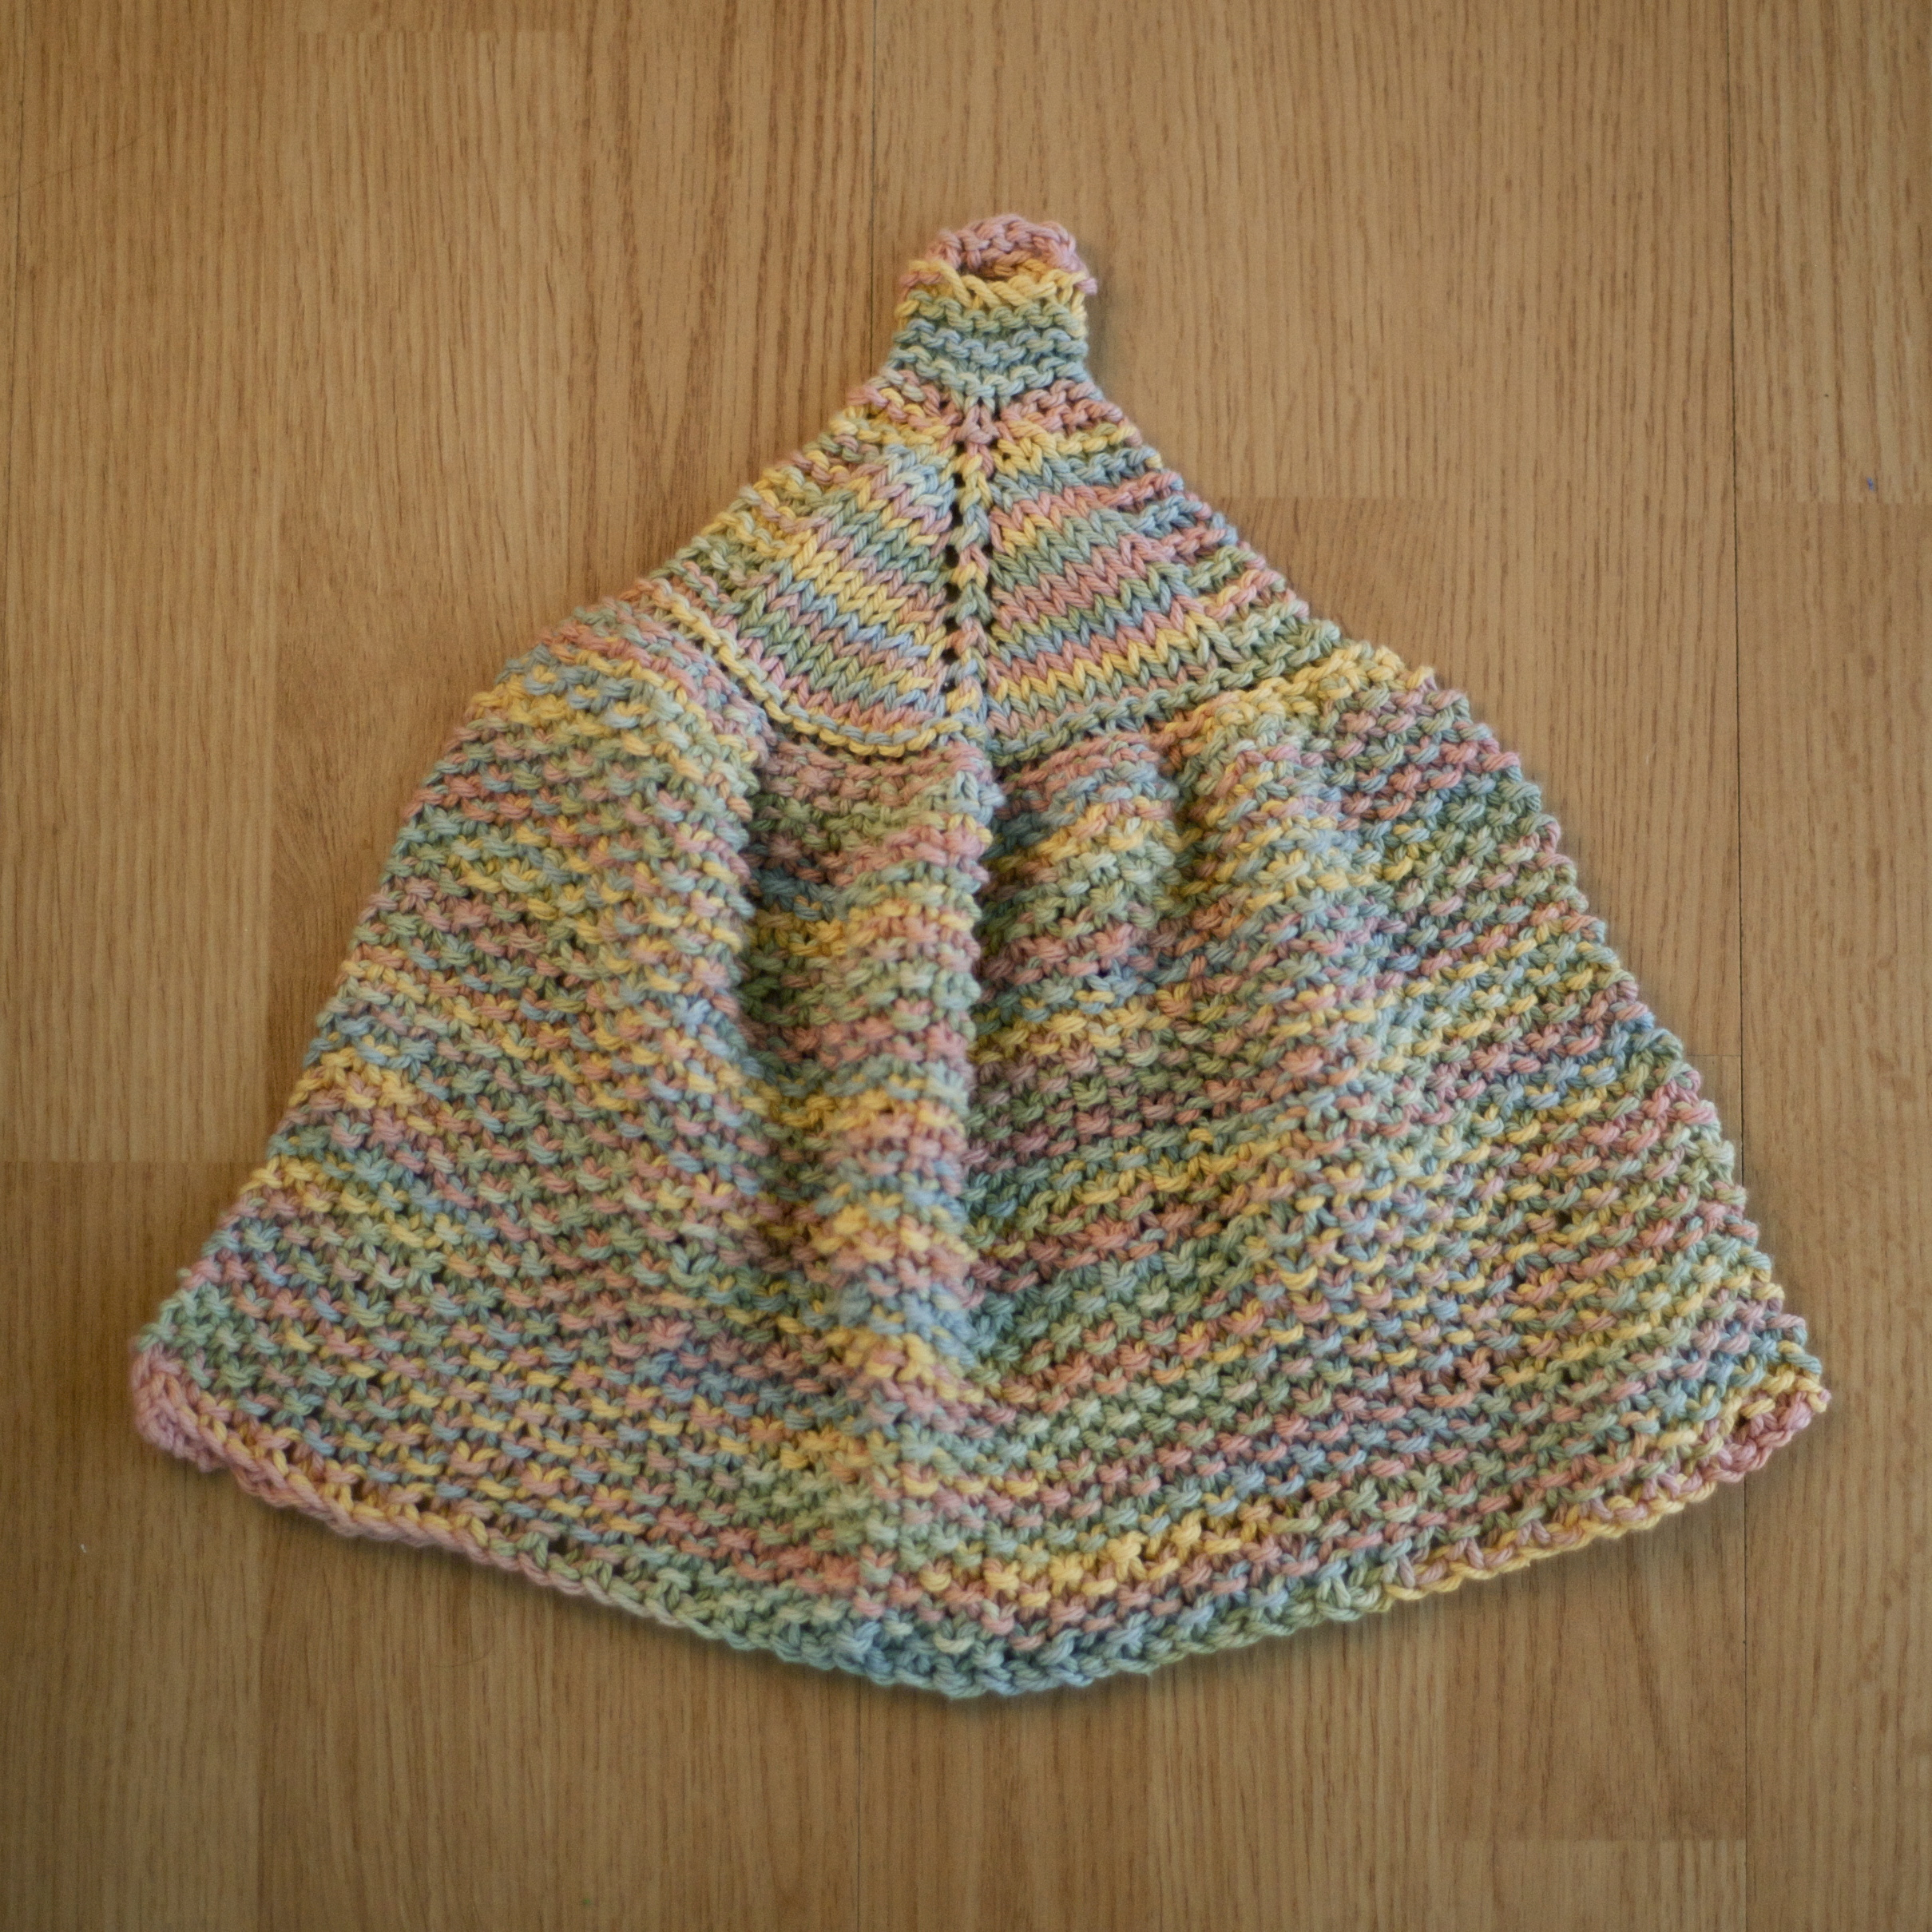 Simple hanging kitchen towel, a knitting pattern